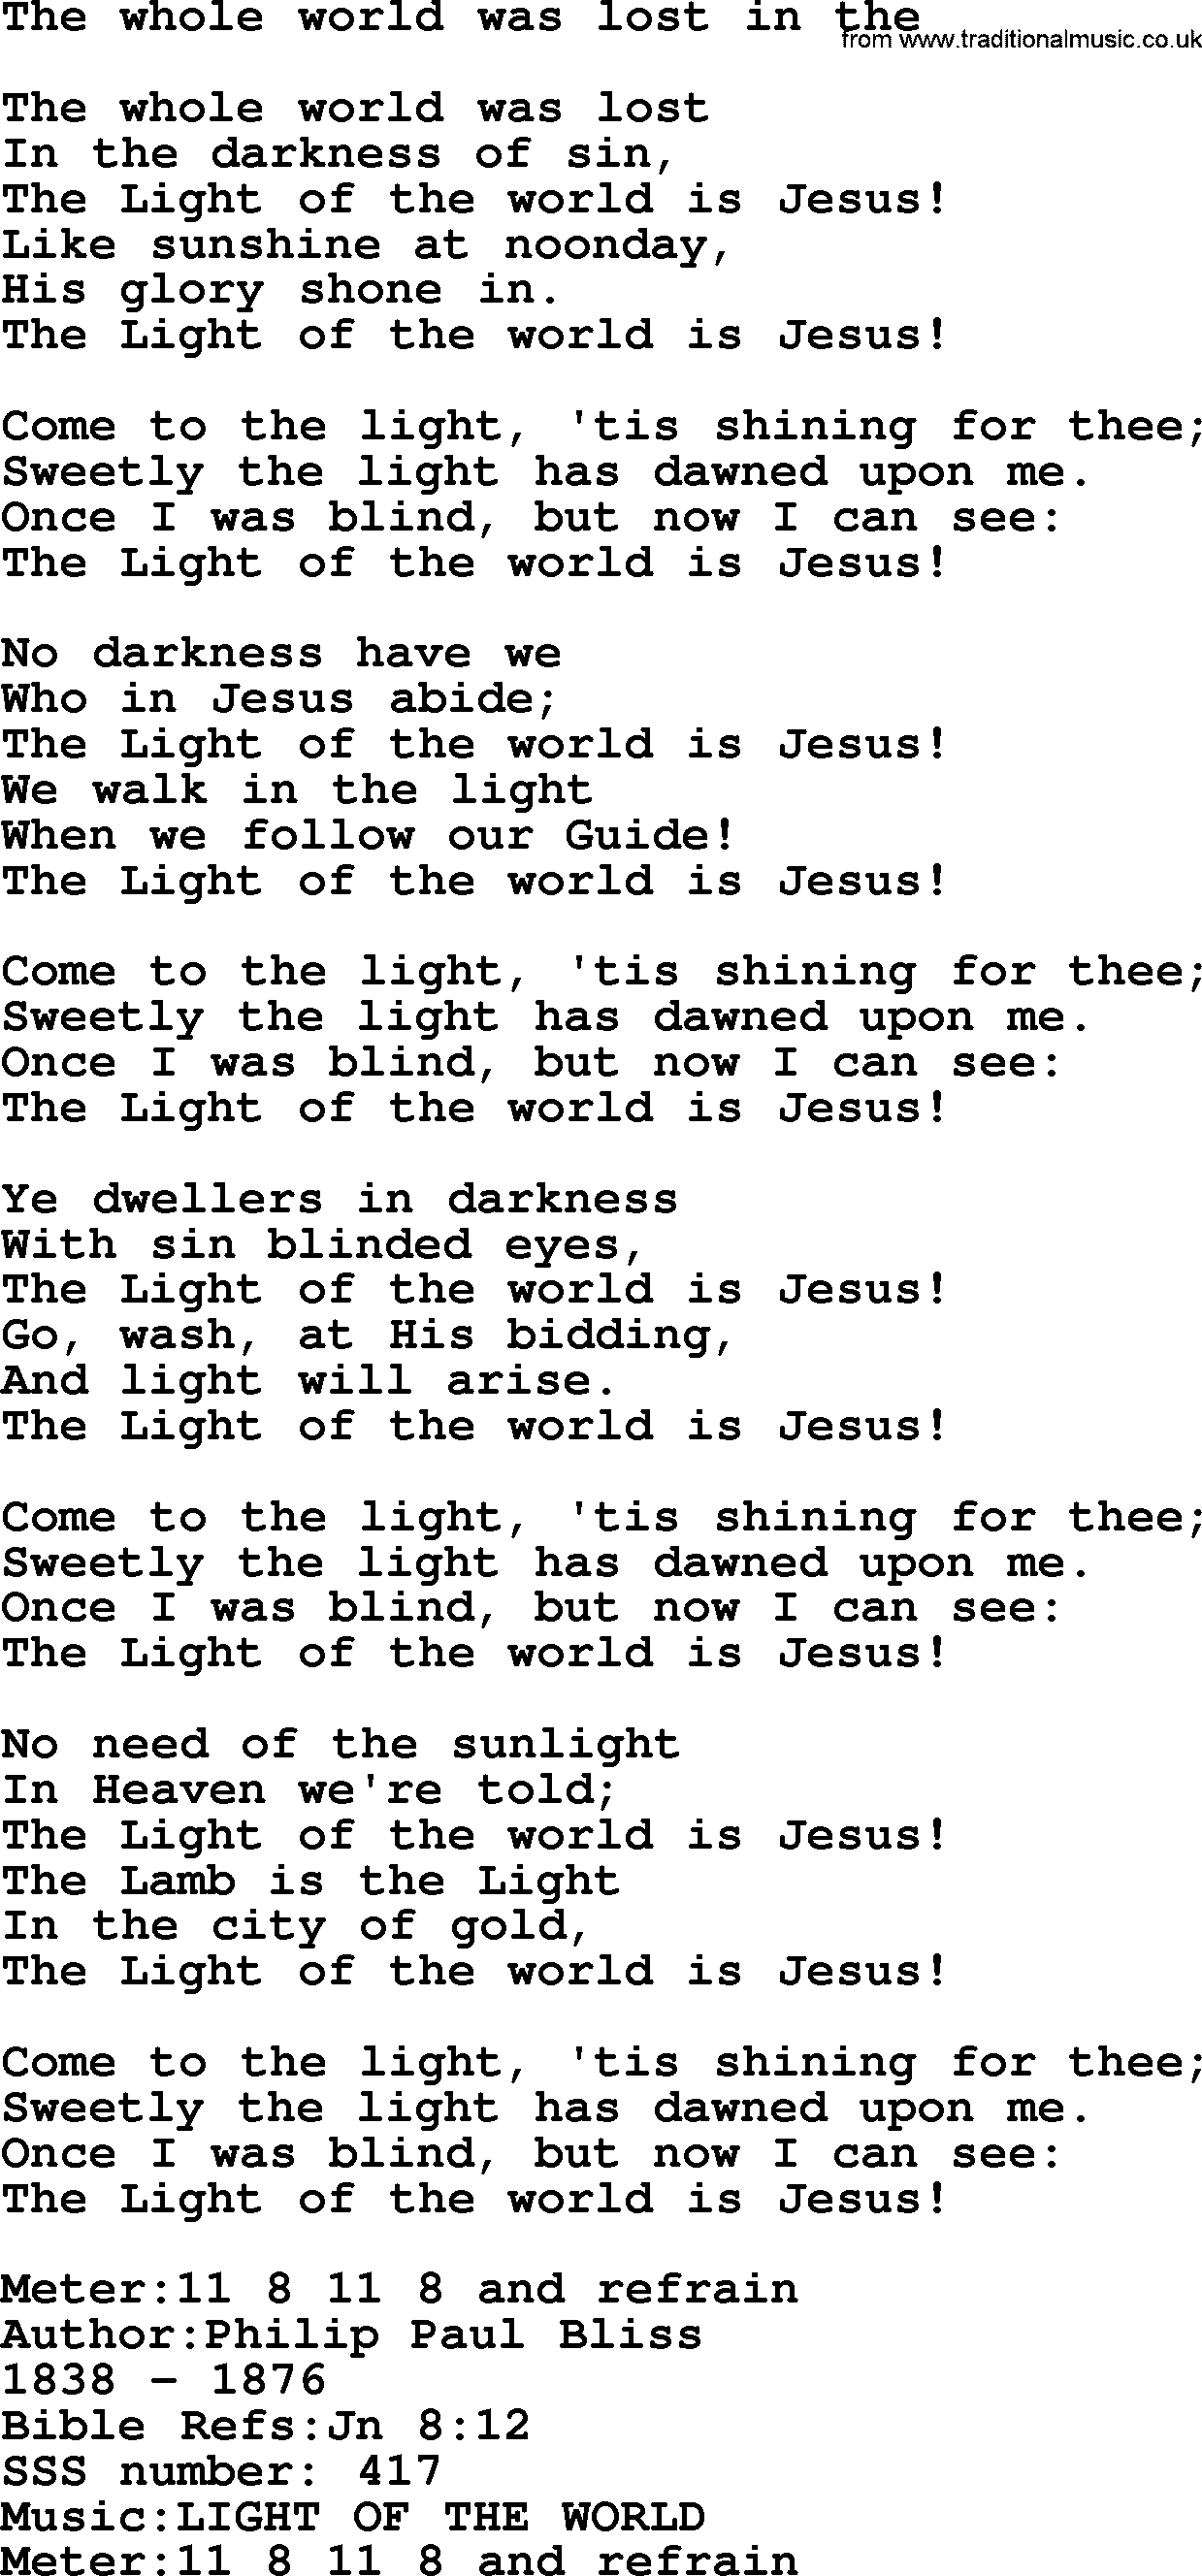 Sacred Songs and Solos complete, 1200 Hymns, title: The Whole World Was Lost In The, lyrics and PDF